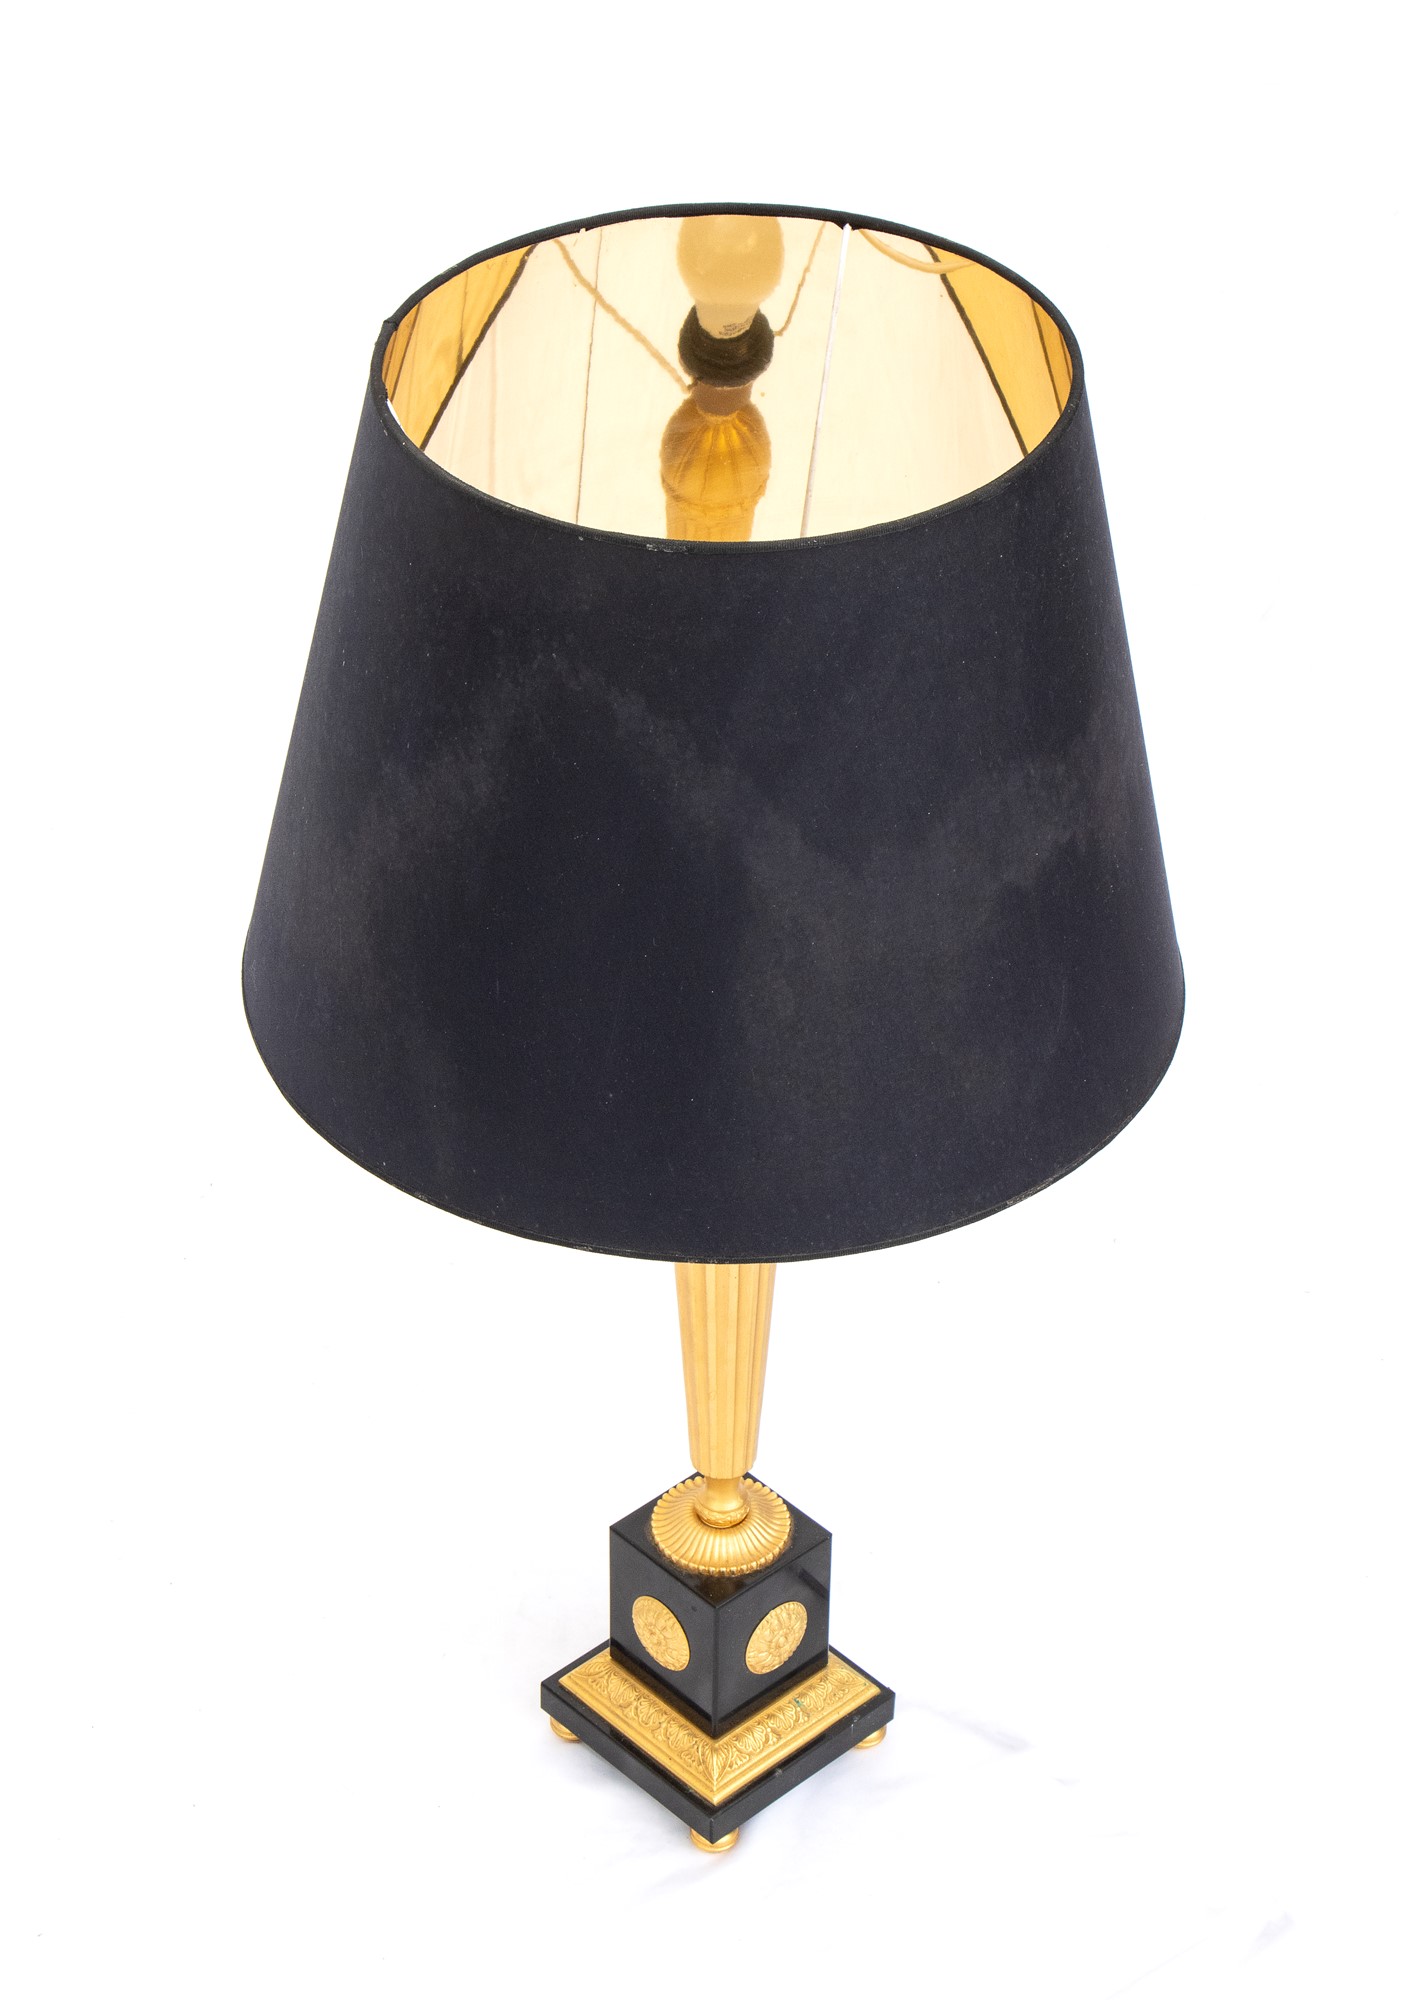 Empire style table lamp - Image 4 of 5